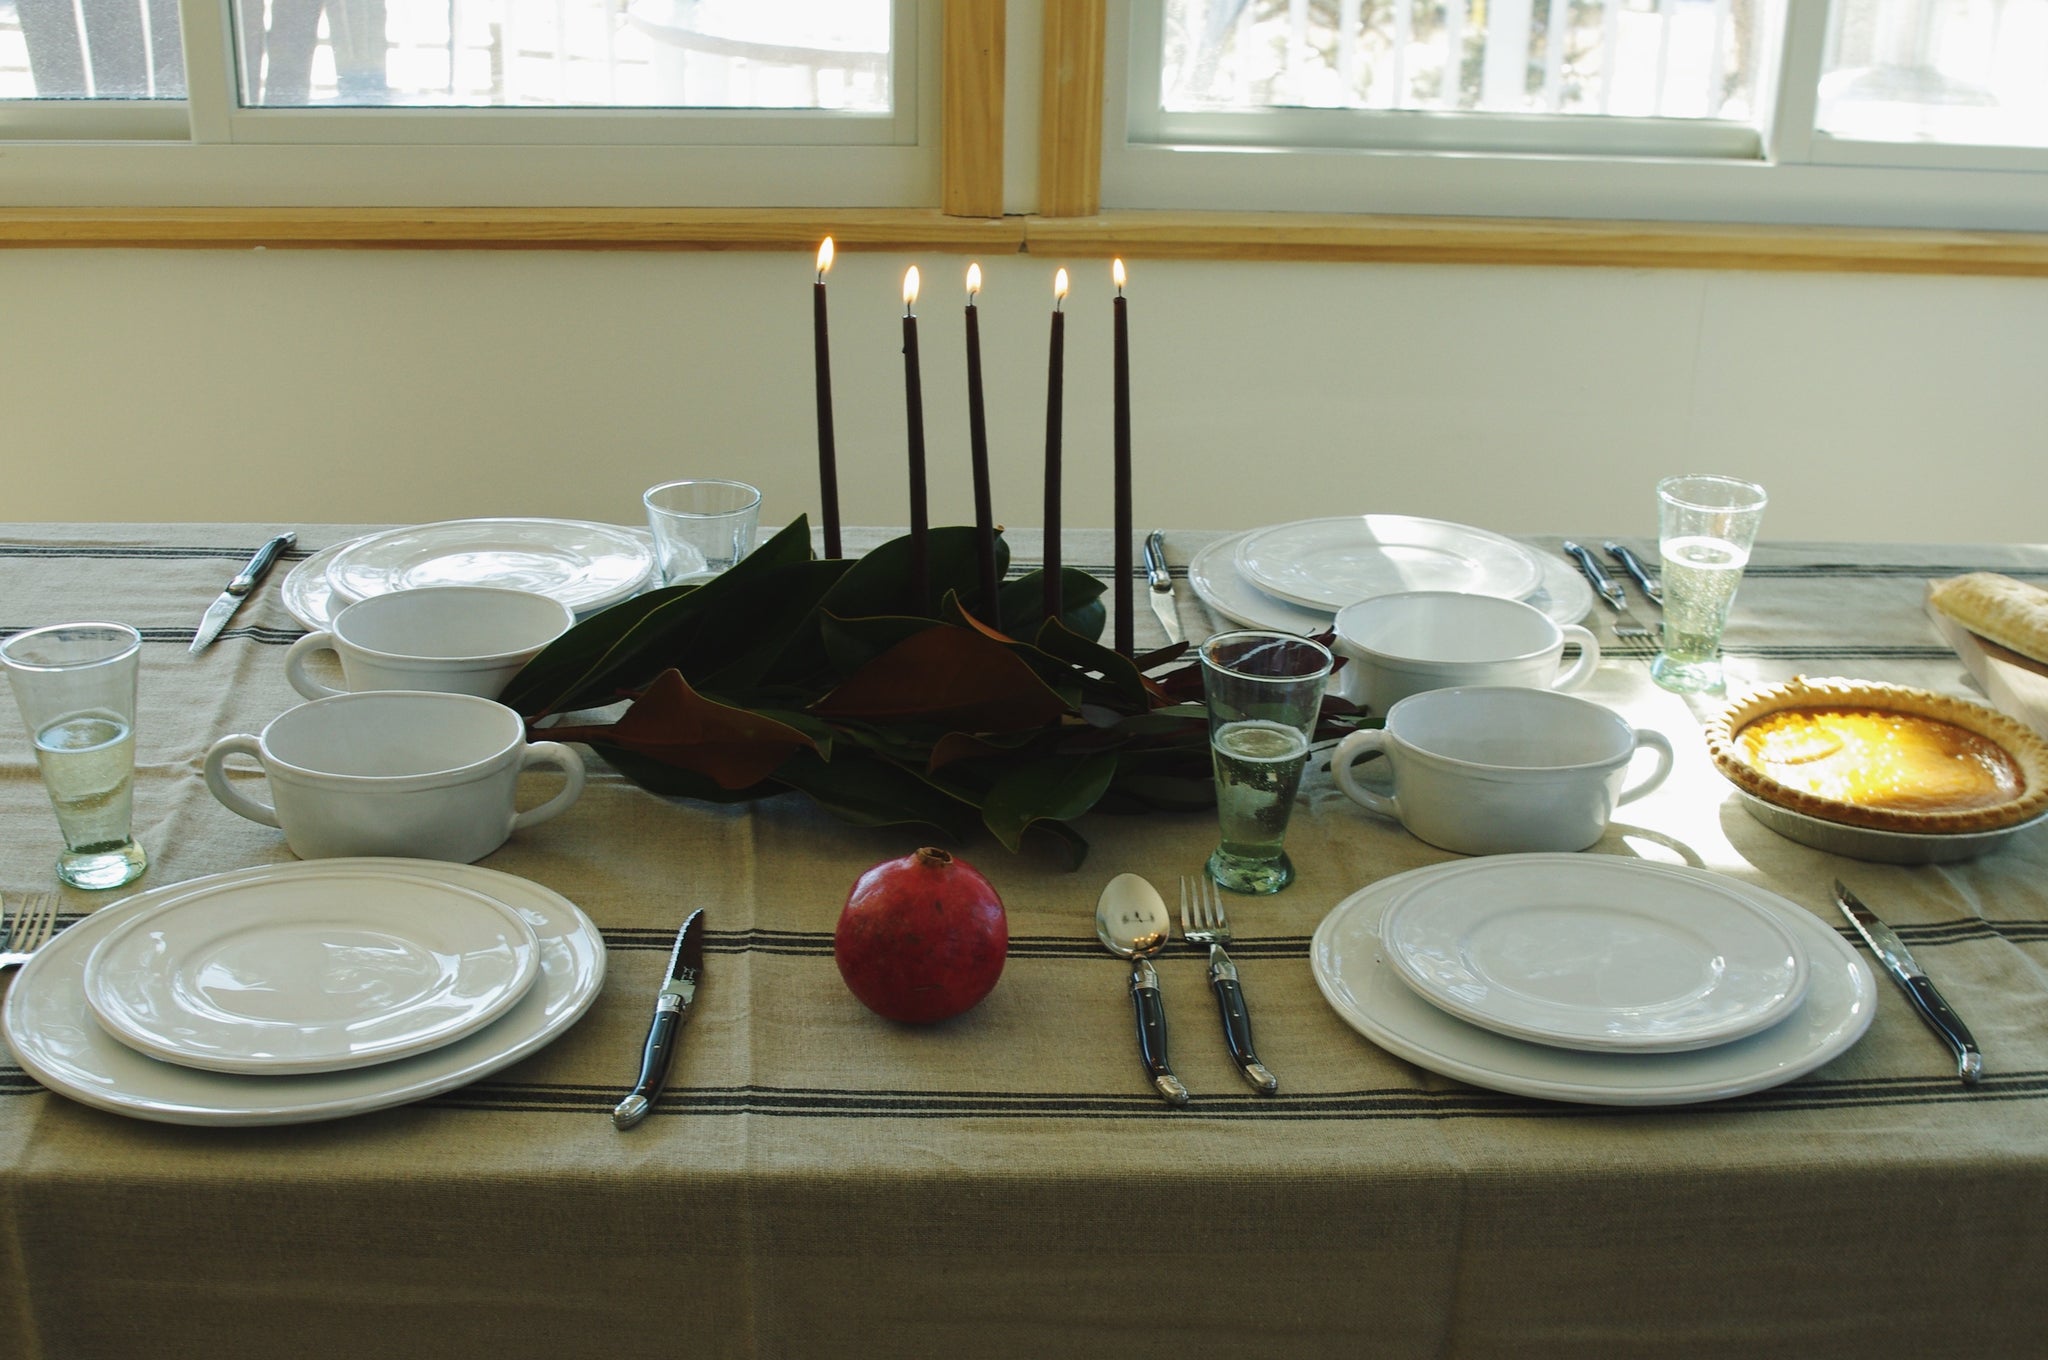 Table setting of white ceramic dinnerware, lit black taper candles, magnolia leaves garland, pomegranates, pie, small green champagne flutes, and black cutlery.